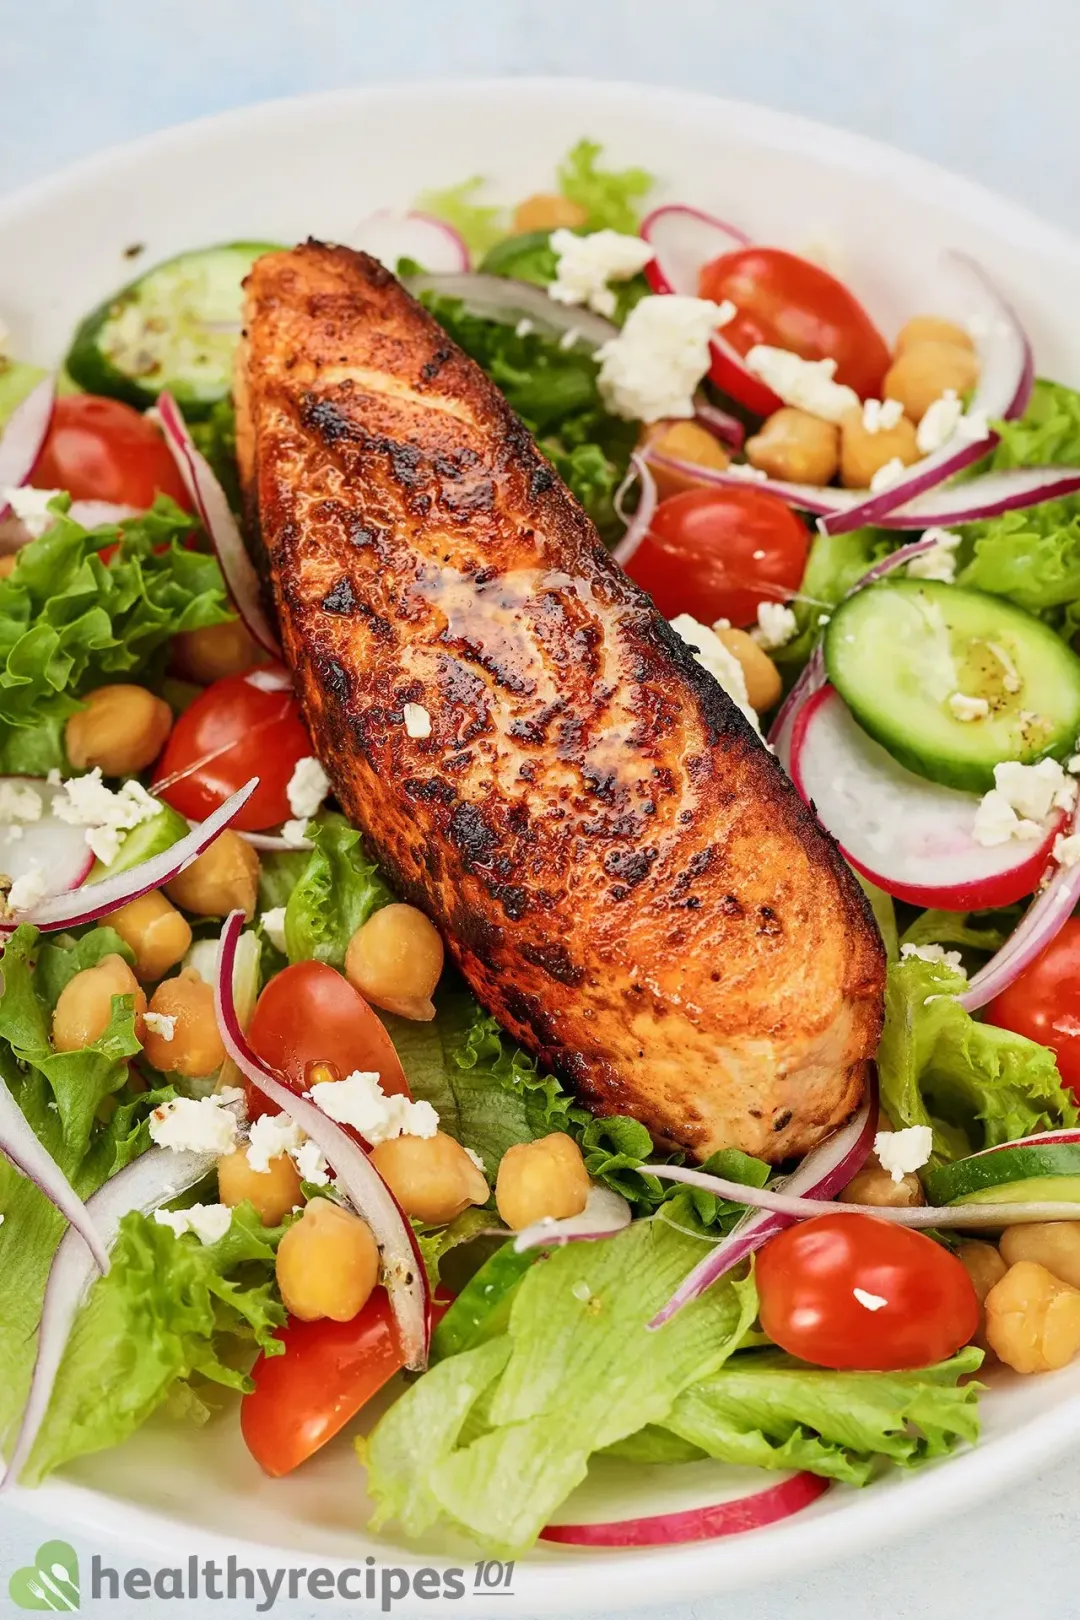 A pan-seared salmon fillet with charred marks laid over a bed of lettuce, chickpeas, halved cherry tomatoes, sliced radish and sliced cucumbers